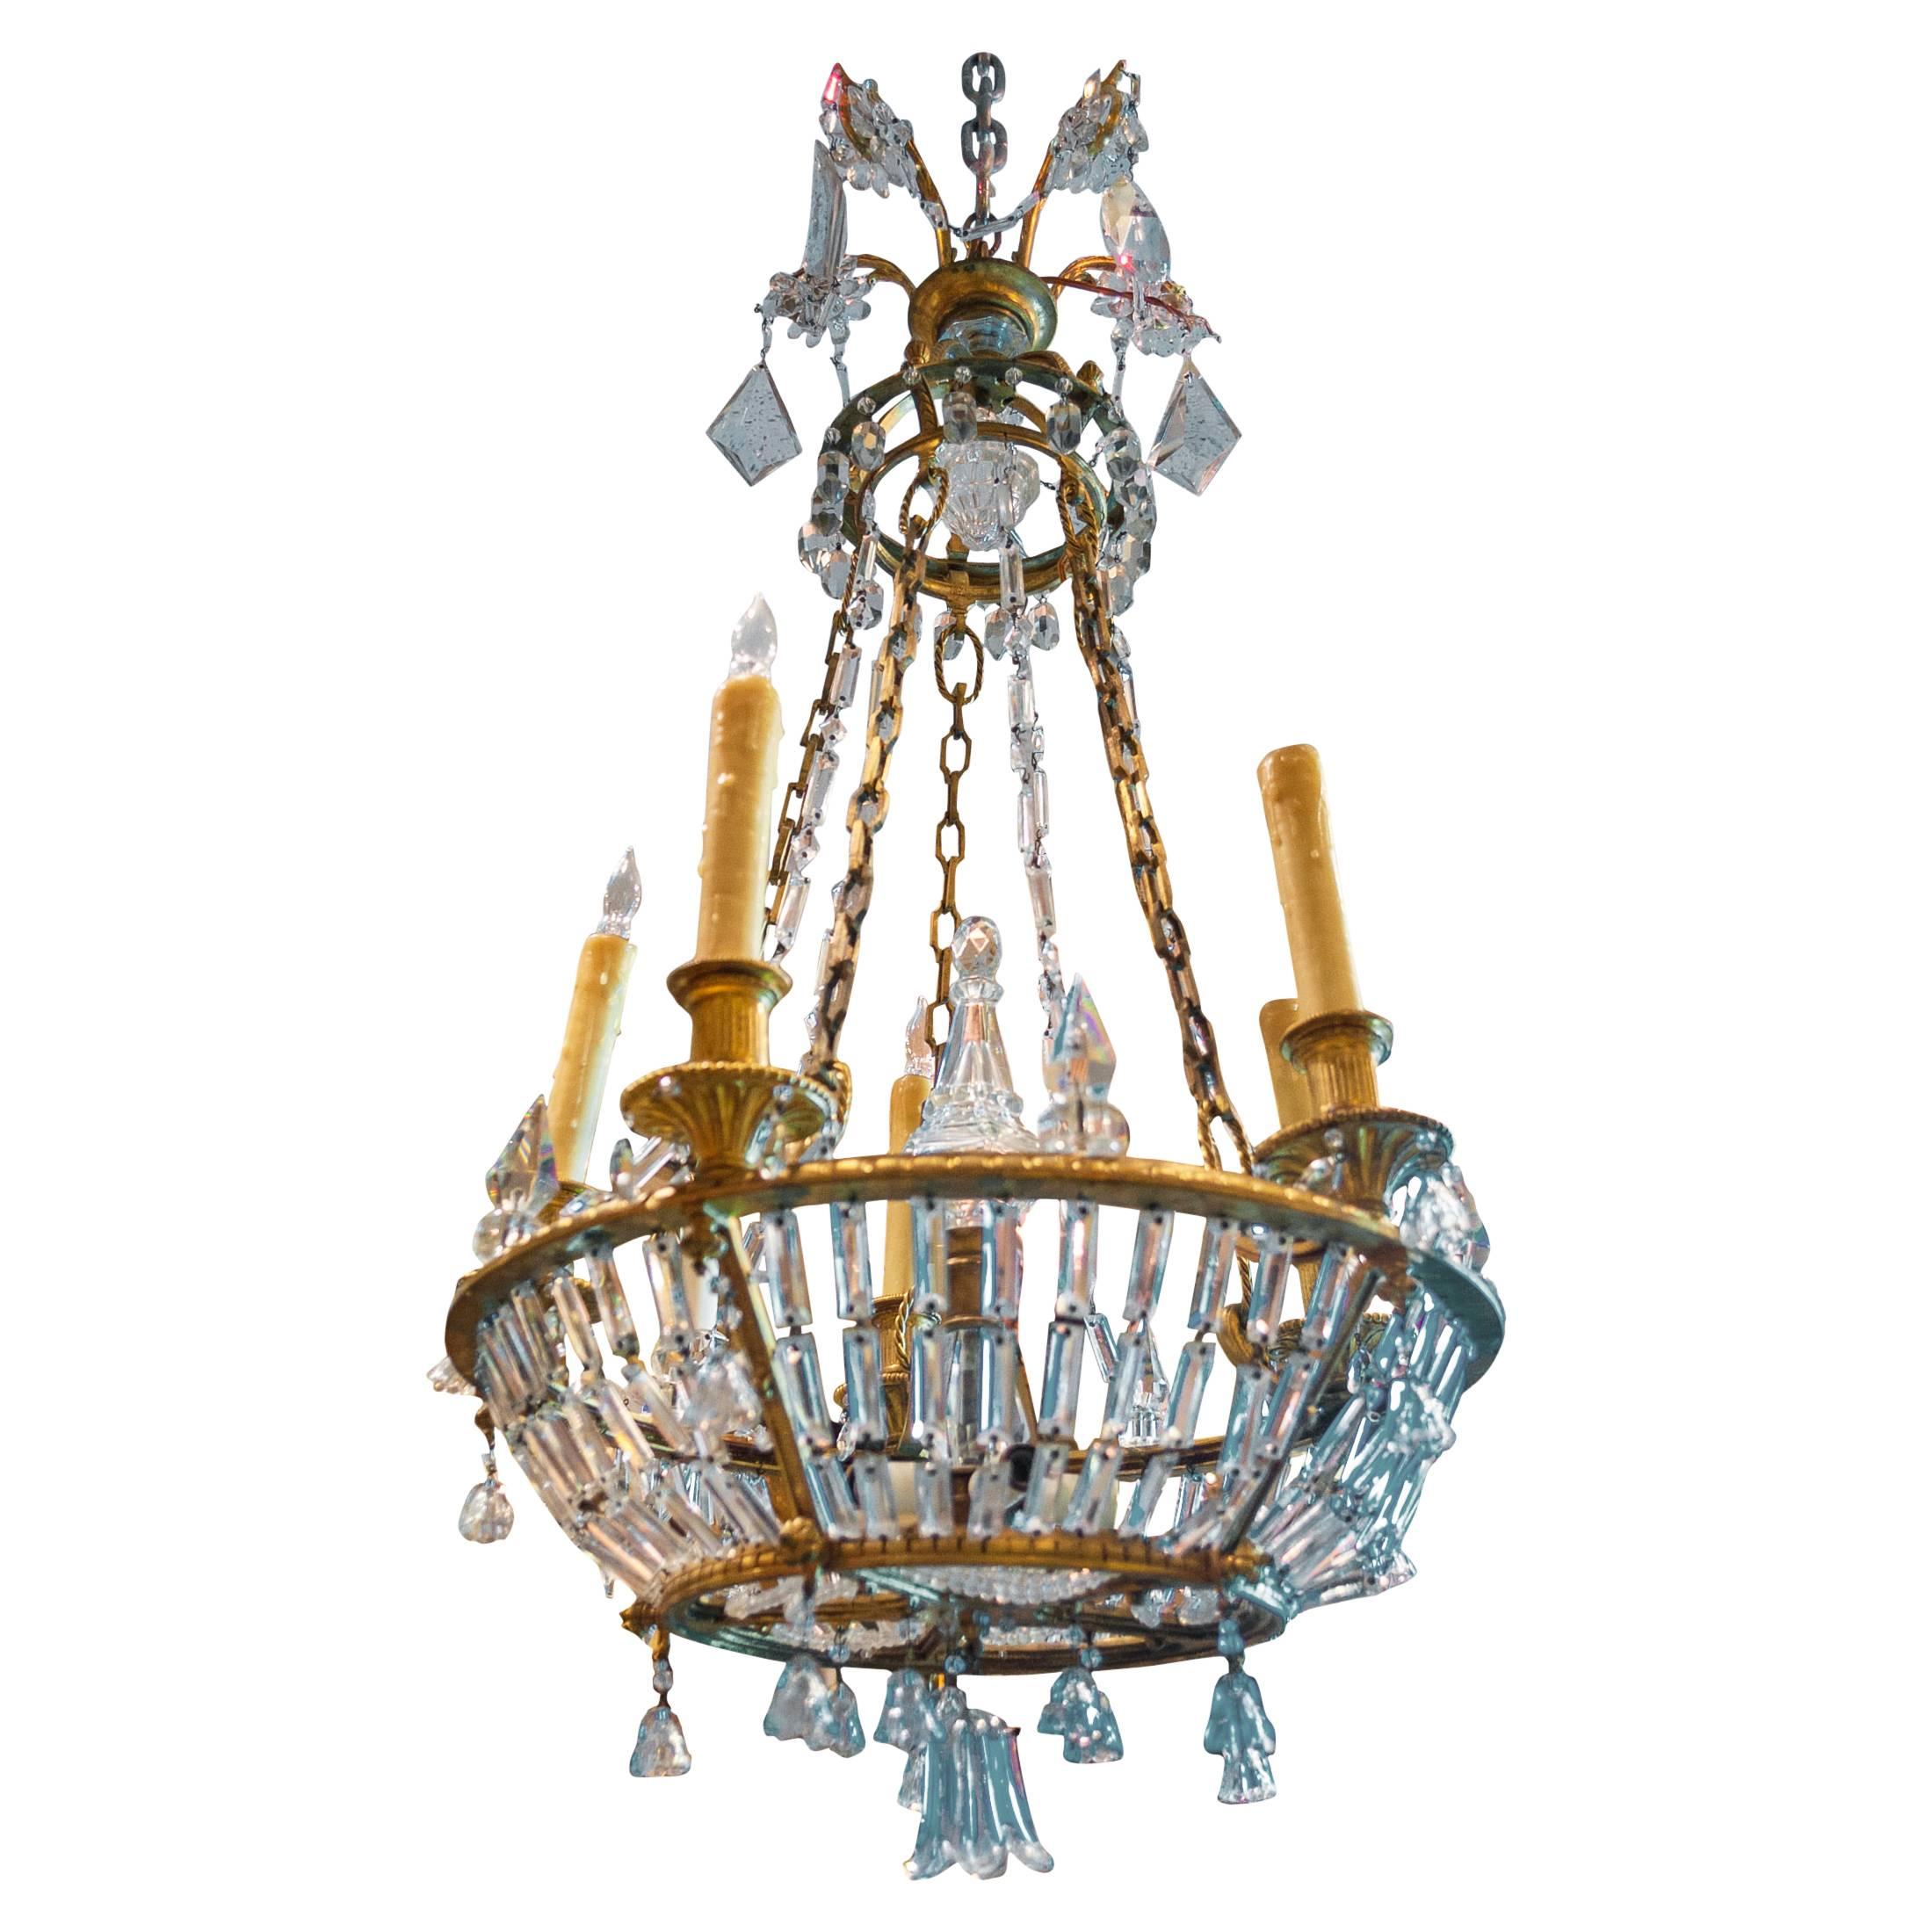 Fantastic Baltic or Russian Crystal and Bronze Ten-Light Chandelier